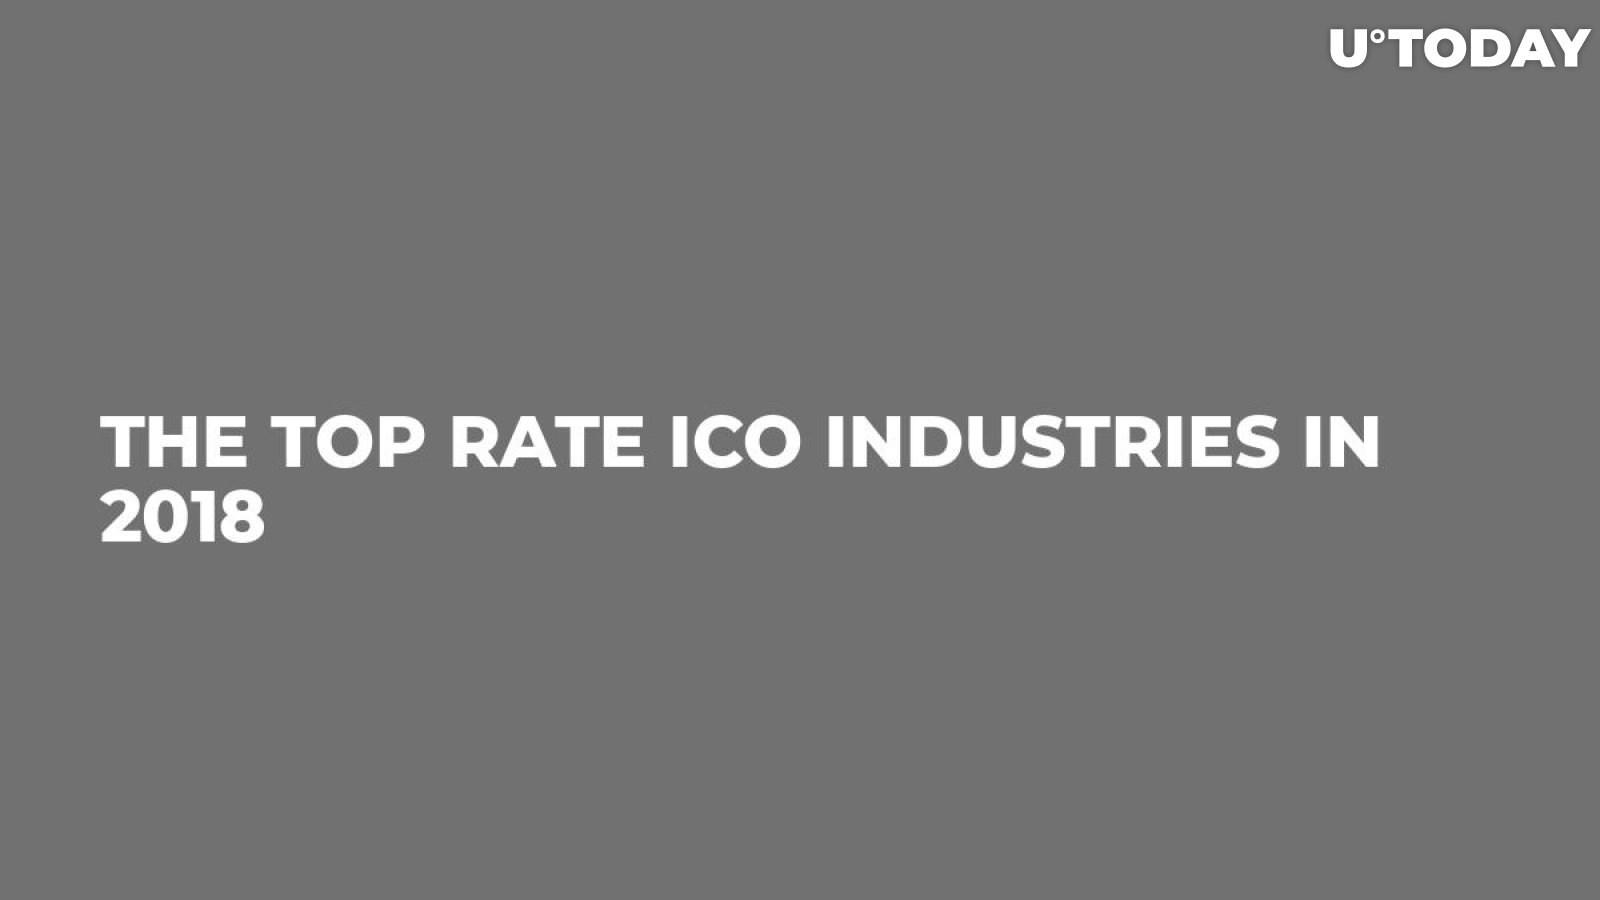 The Top Rate ICO Industries in 2018